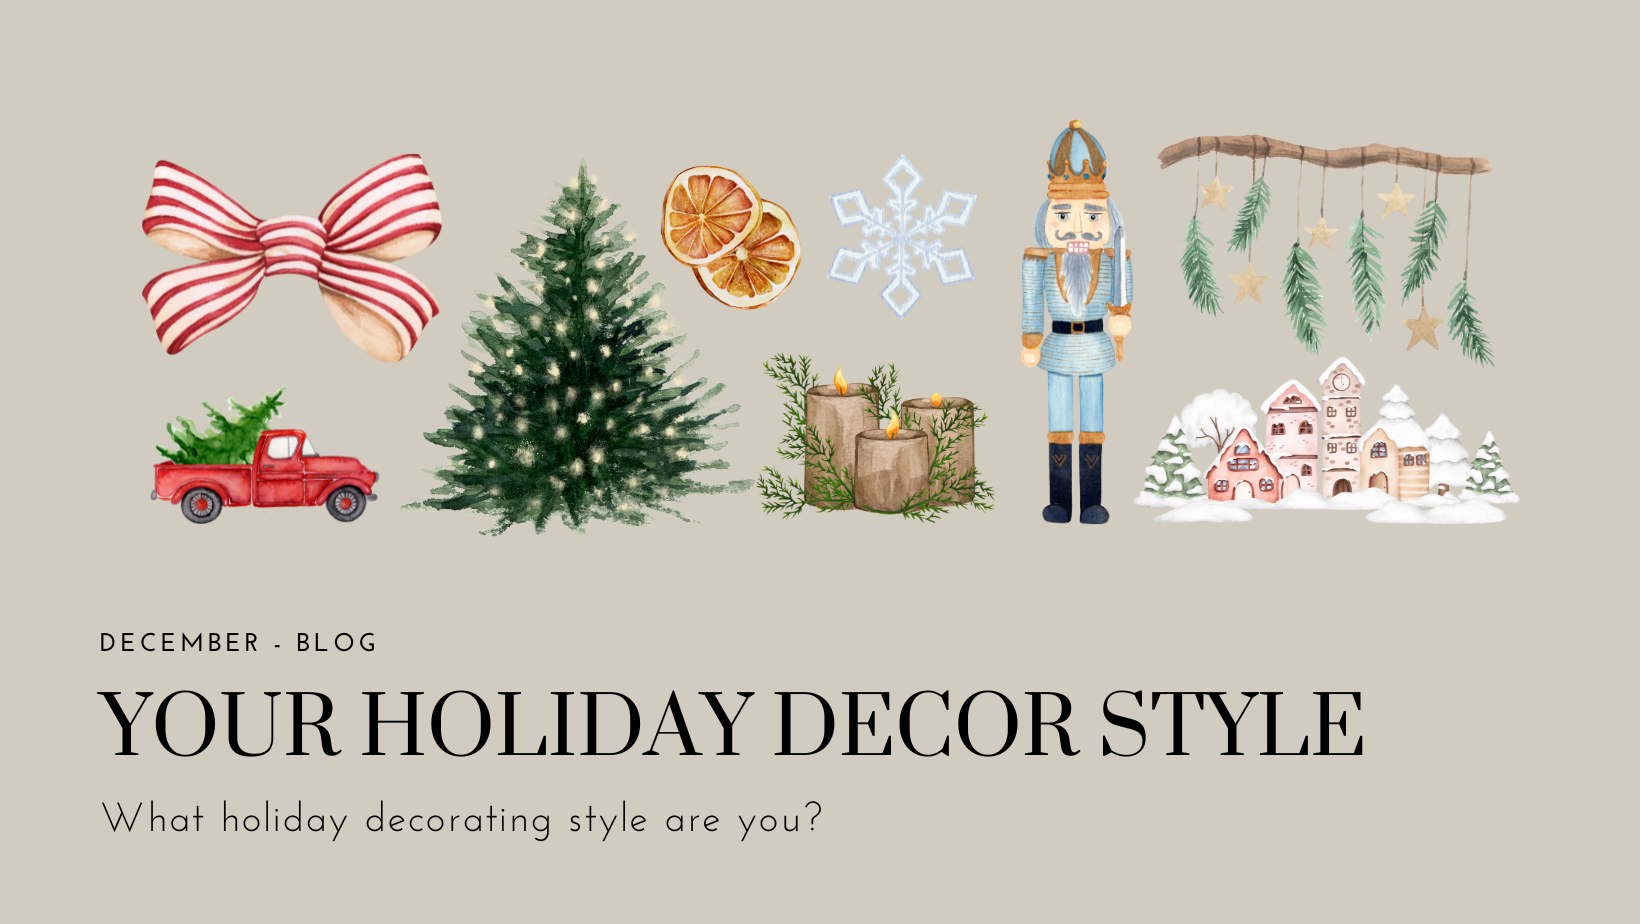 What decorating style are you?